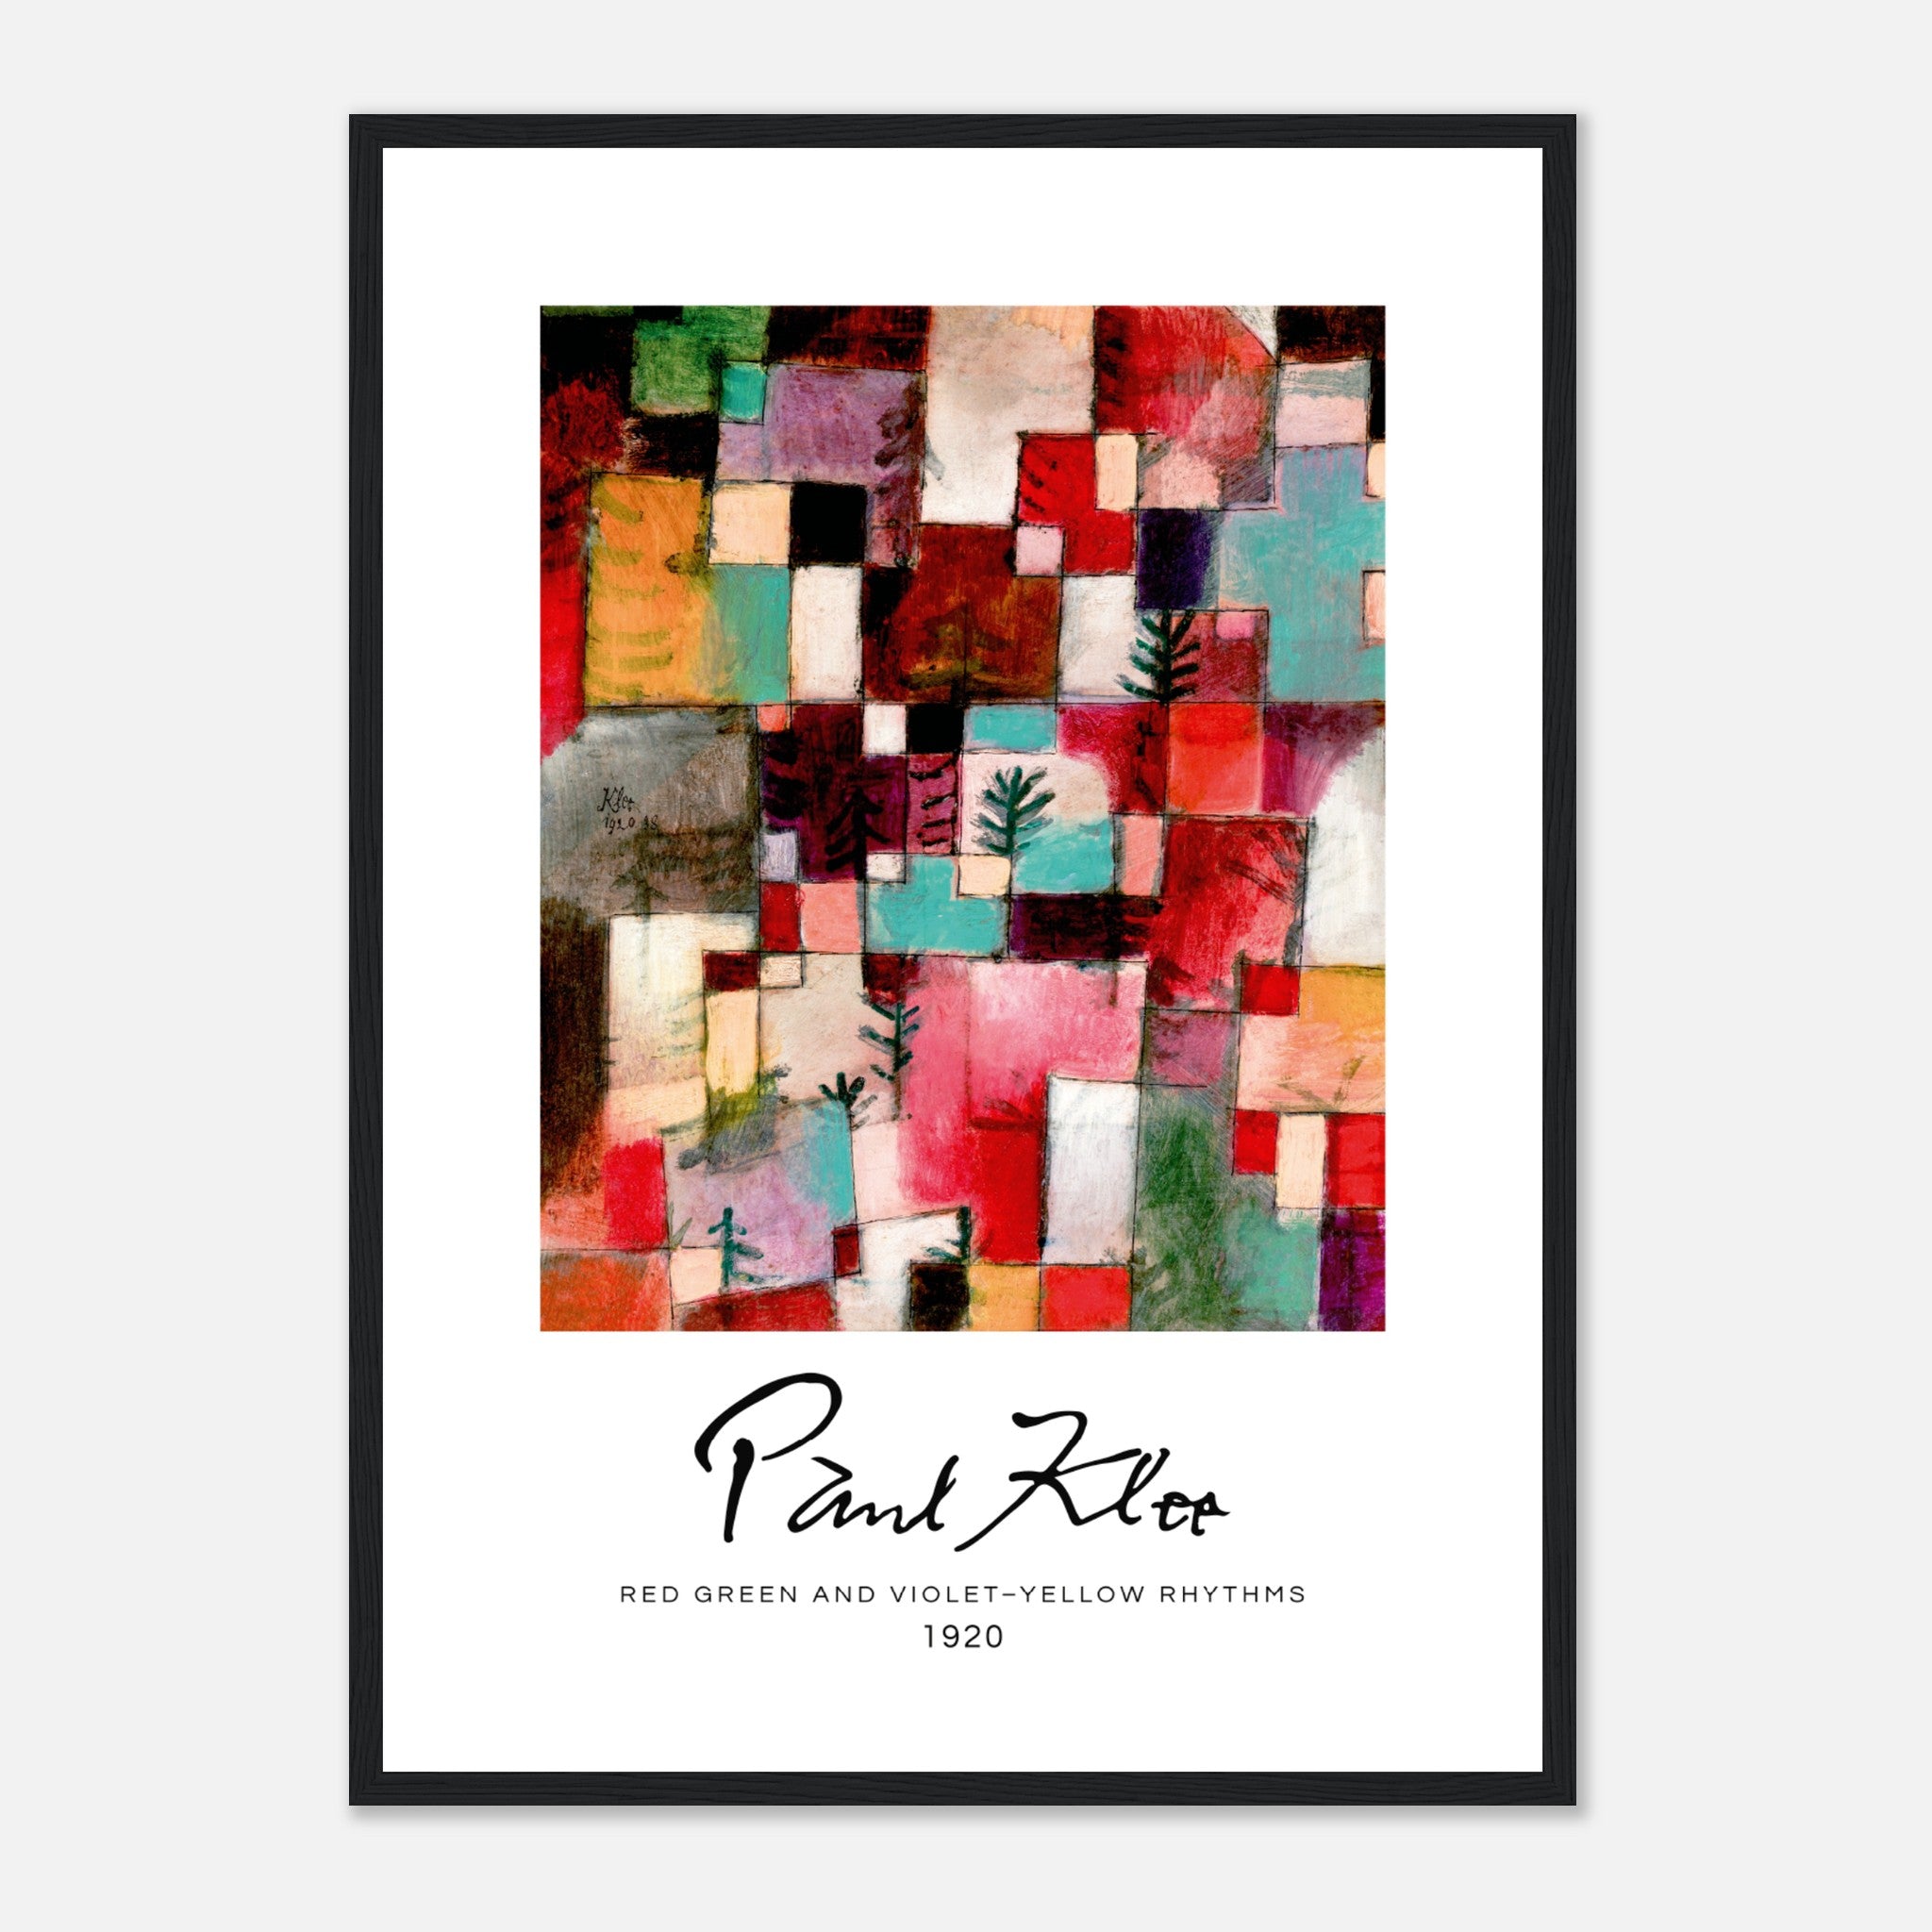 Red green and Violet–Yellow Rhythms by Klee Poster